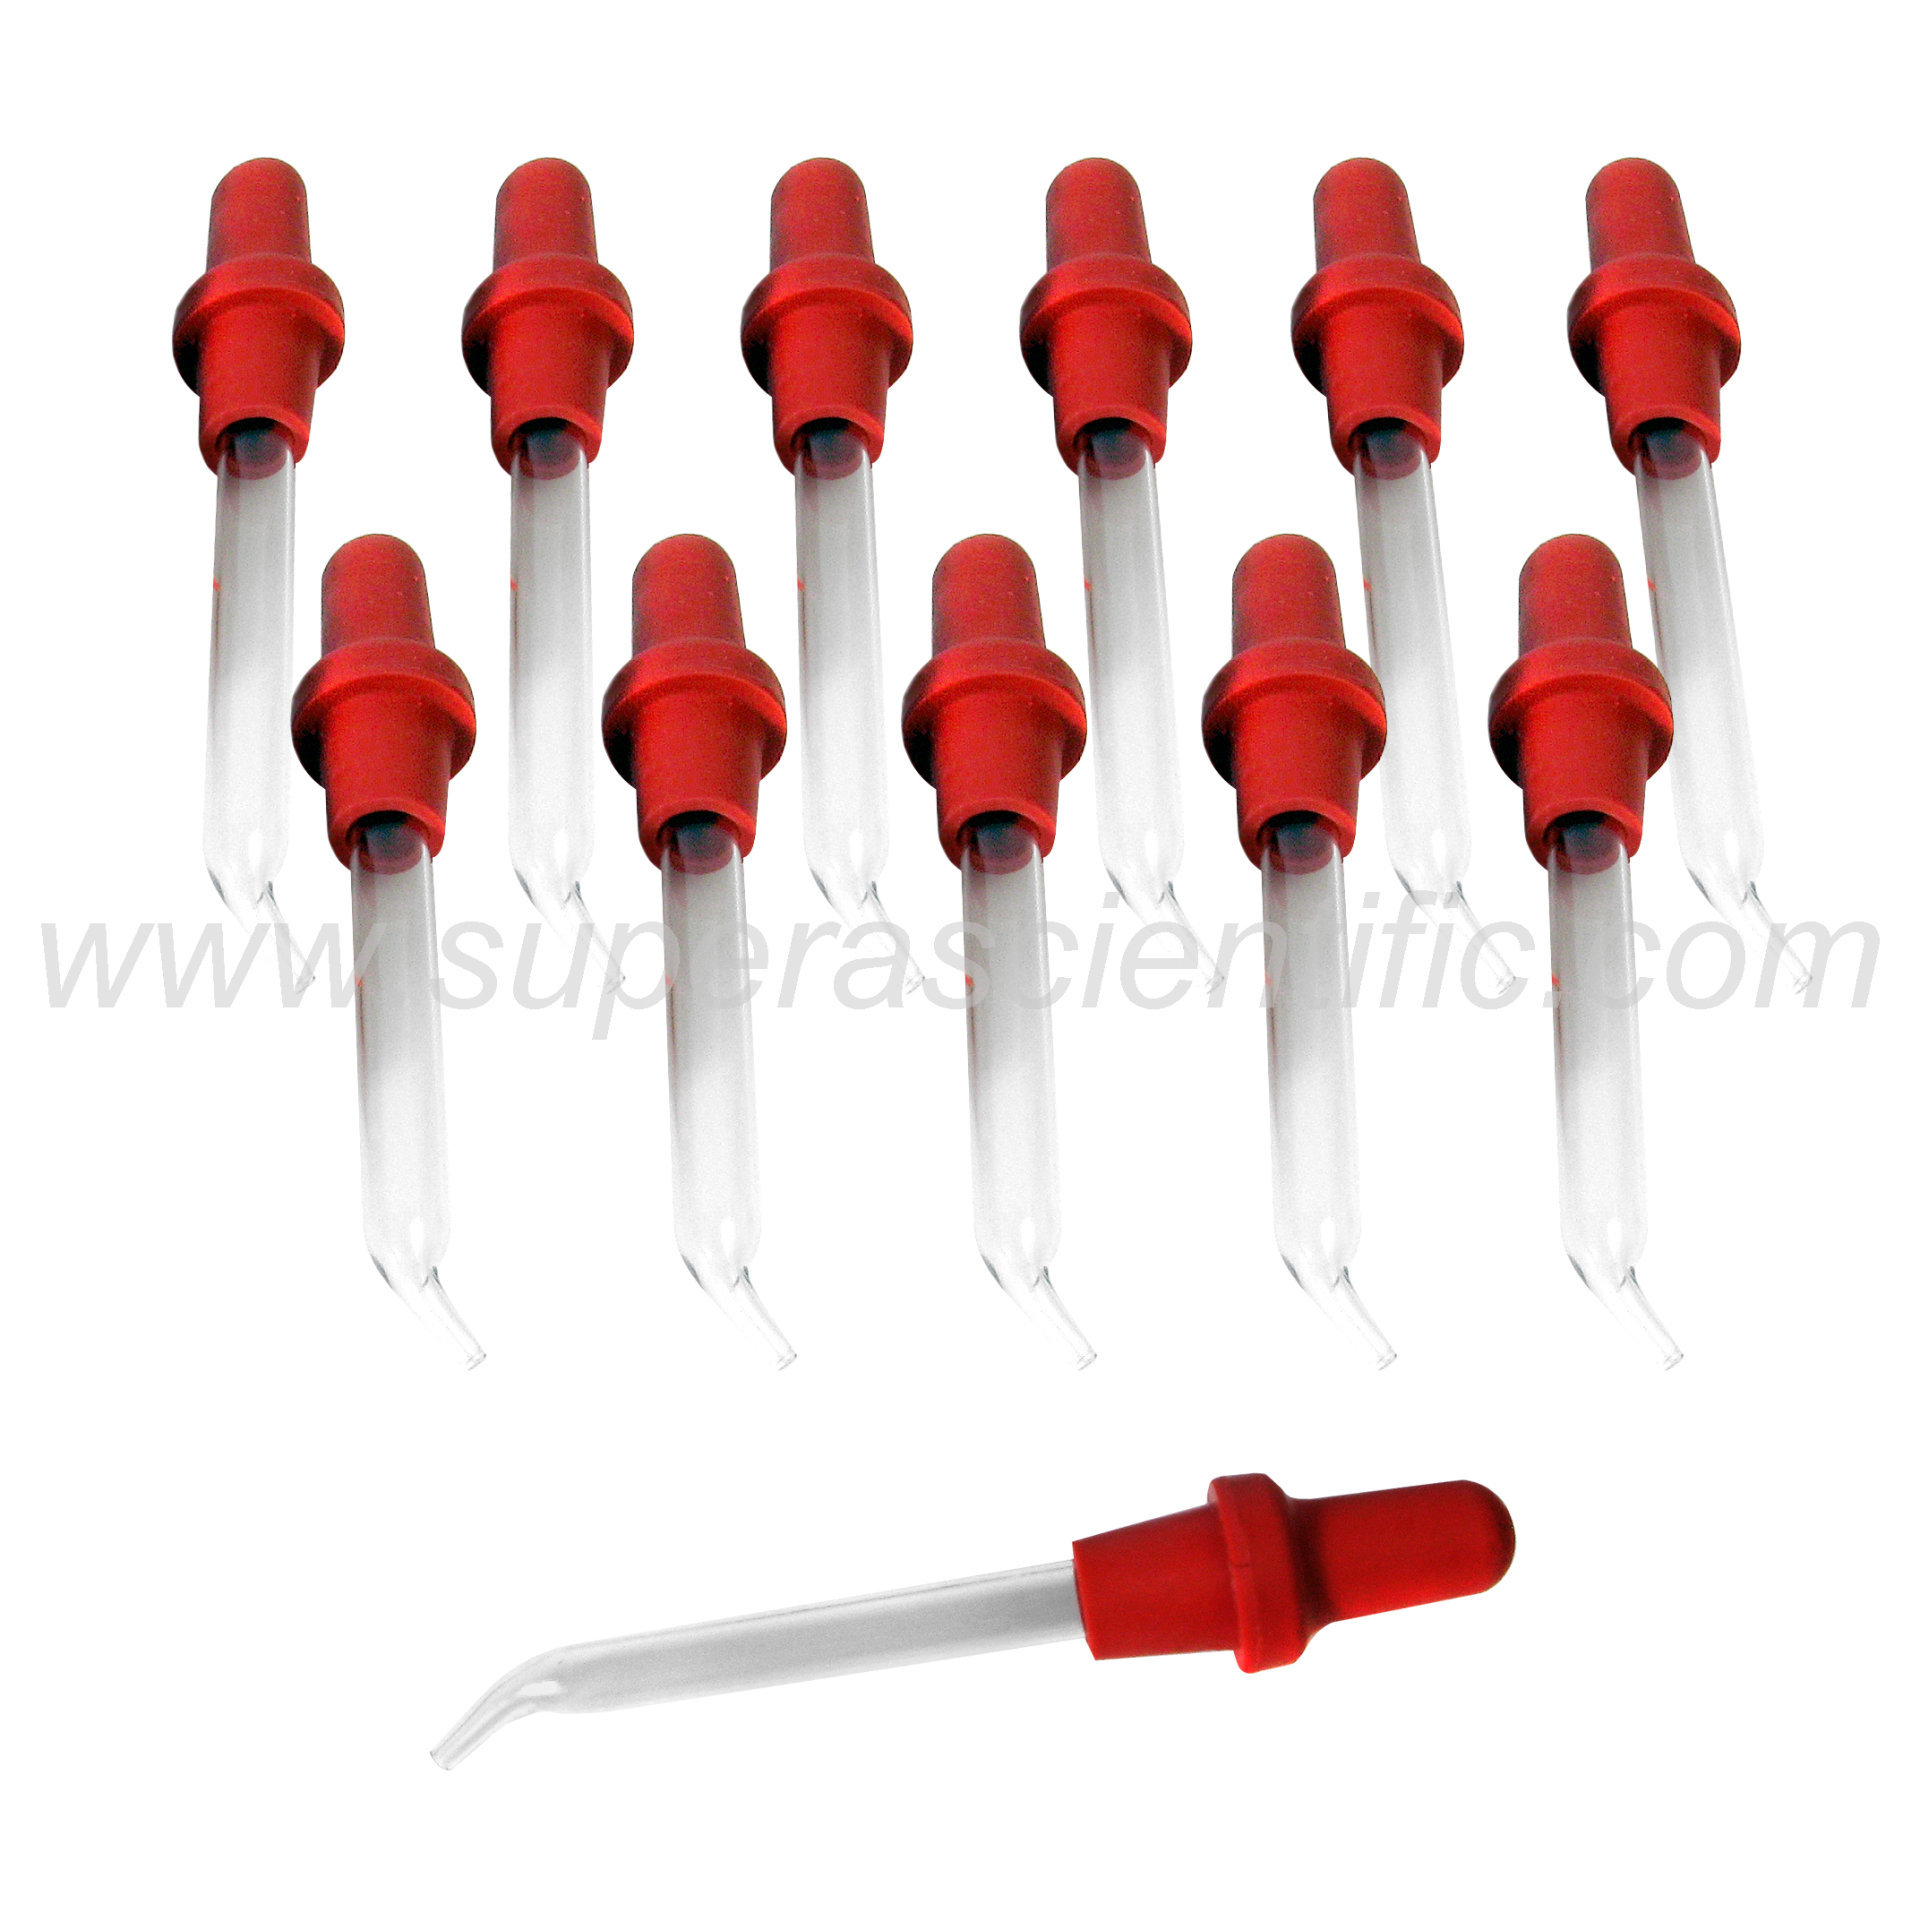 207-2-DZ Barnes Bottle Dropper with Bet Tip & Red Bulb